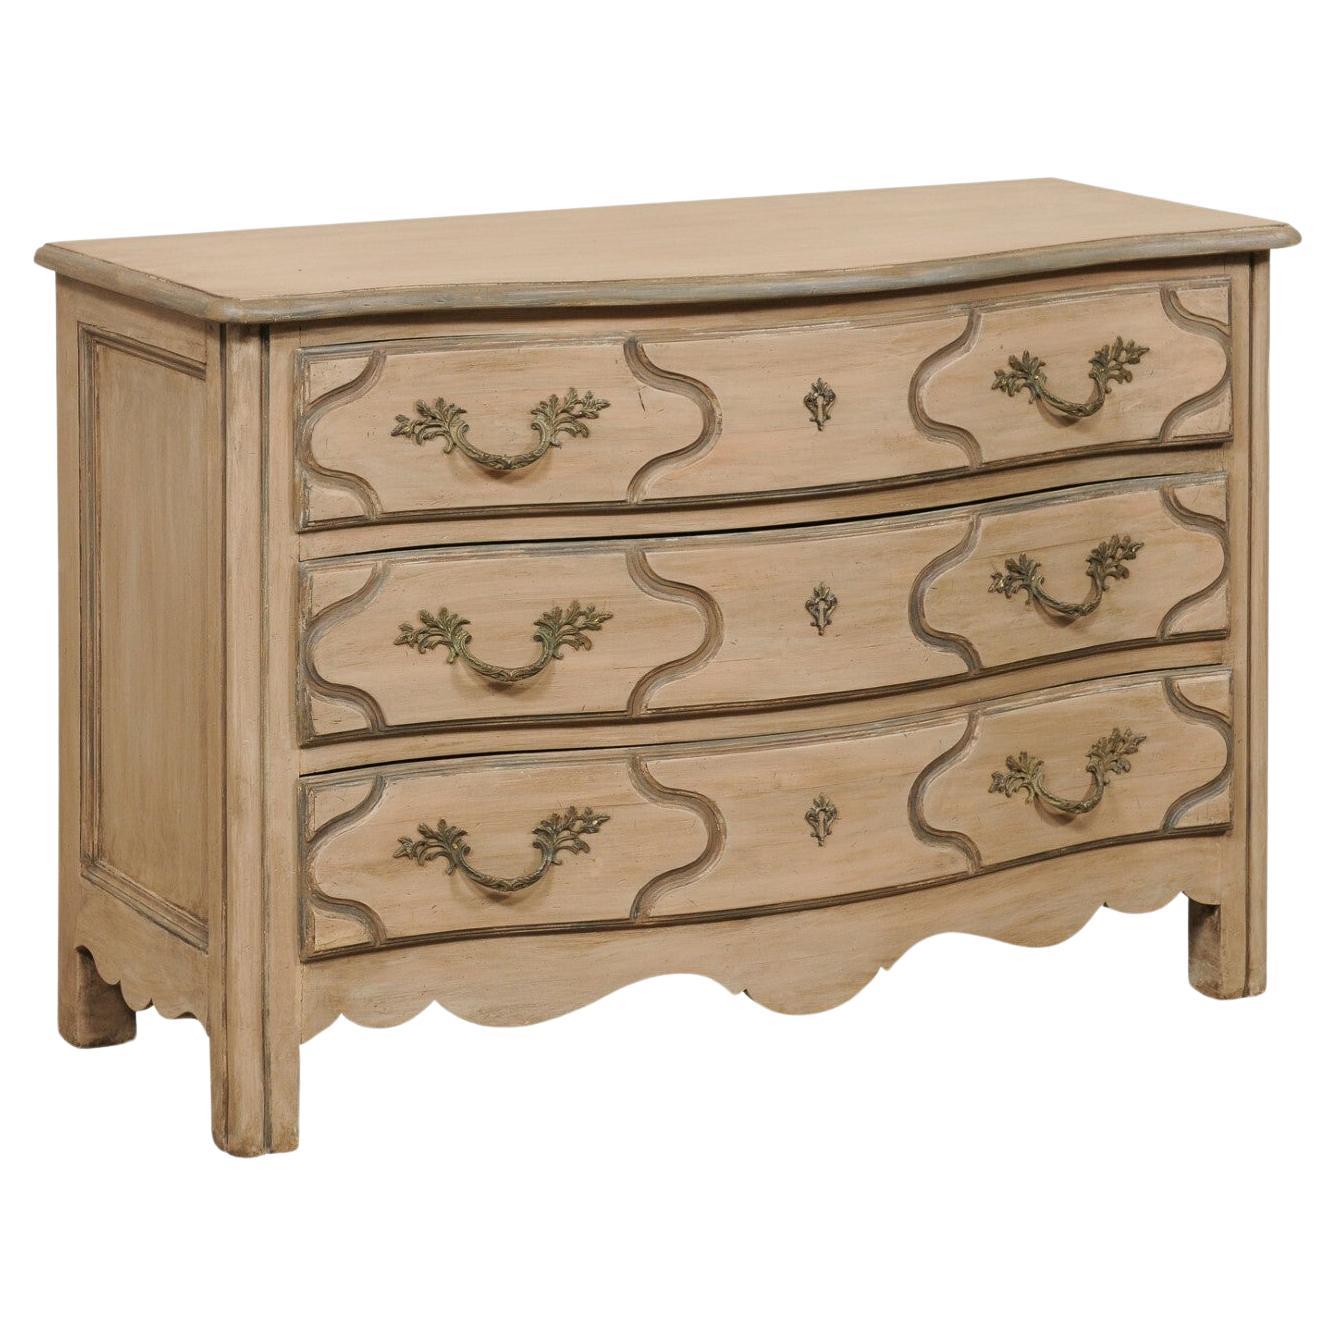 Italian Serpentine Three-Drawer Wooden Chest w/Scalloped Skirt, Mid 20th C. For Sale